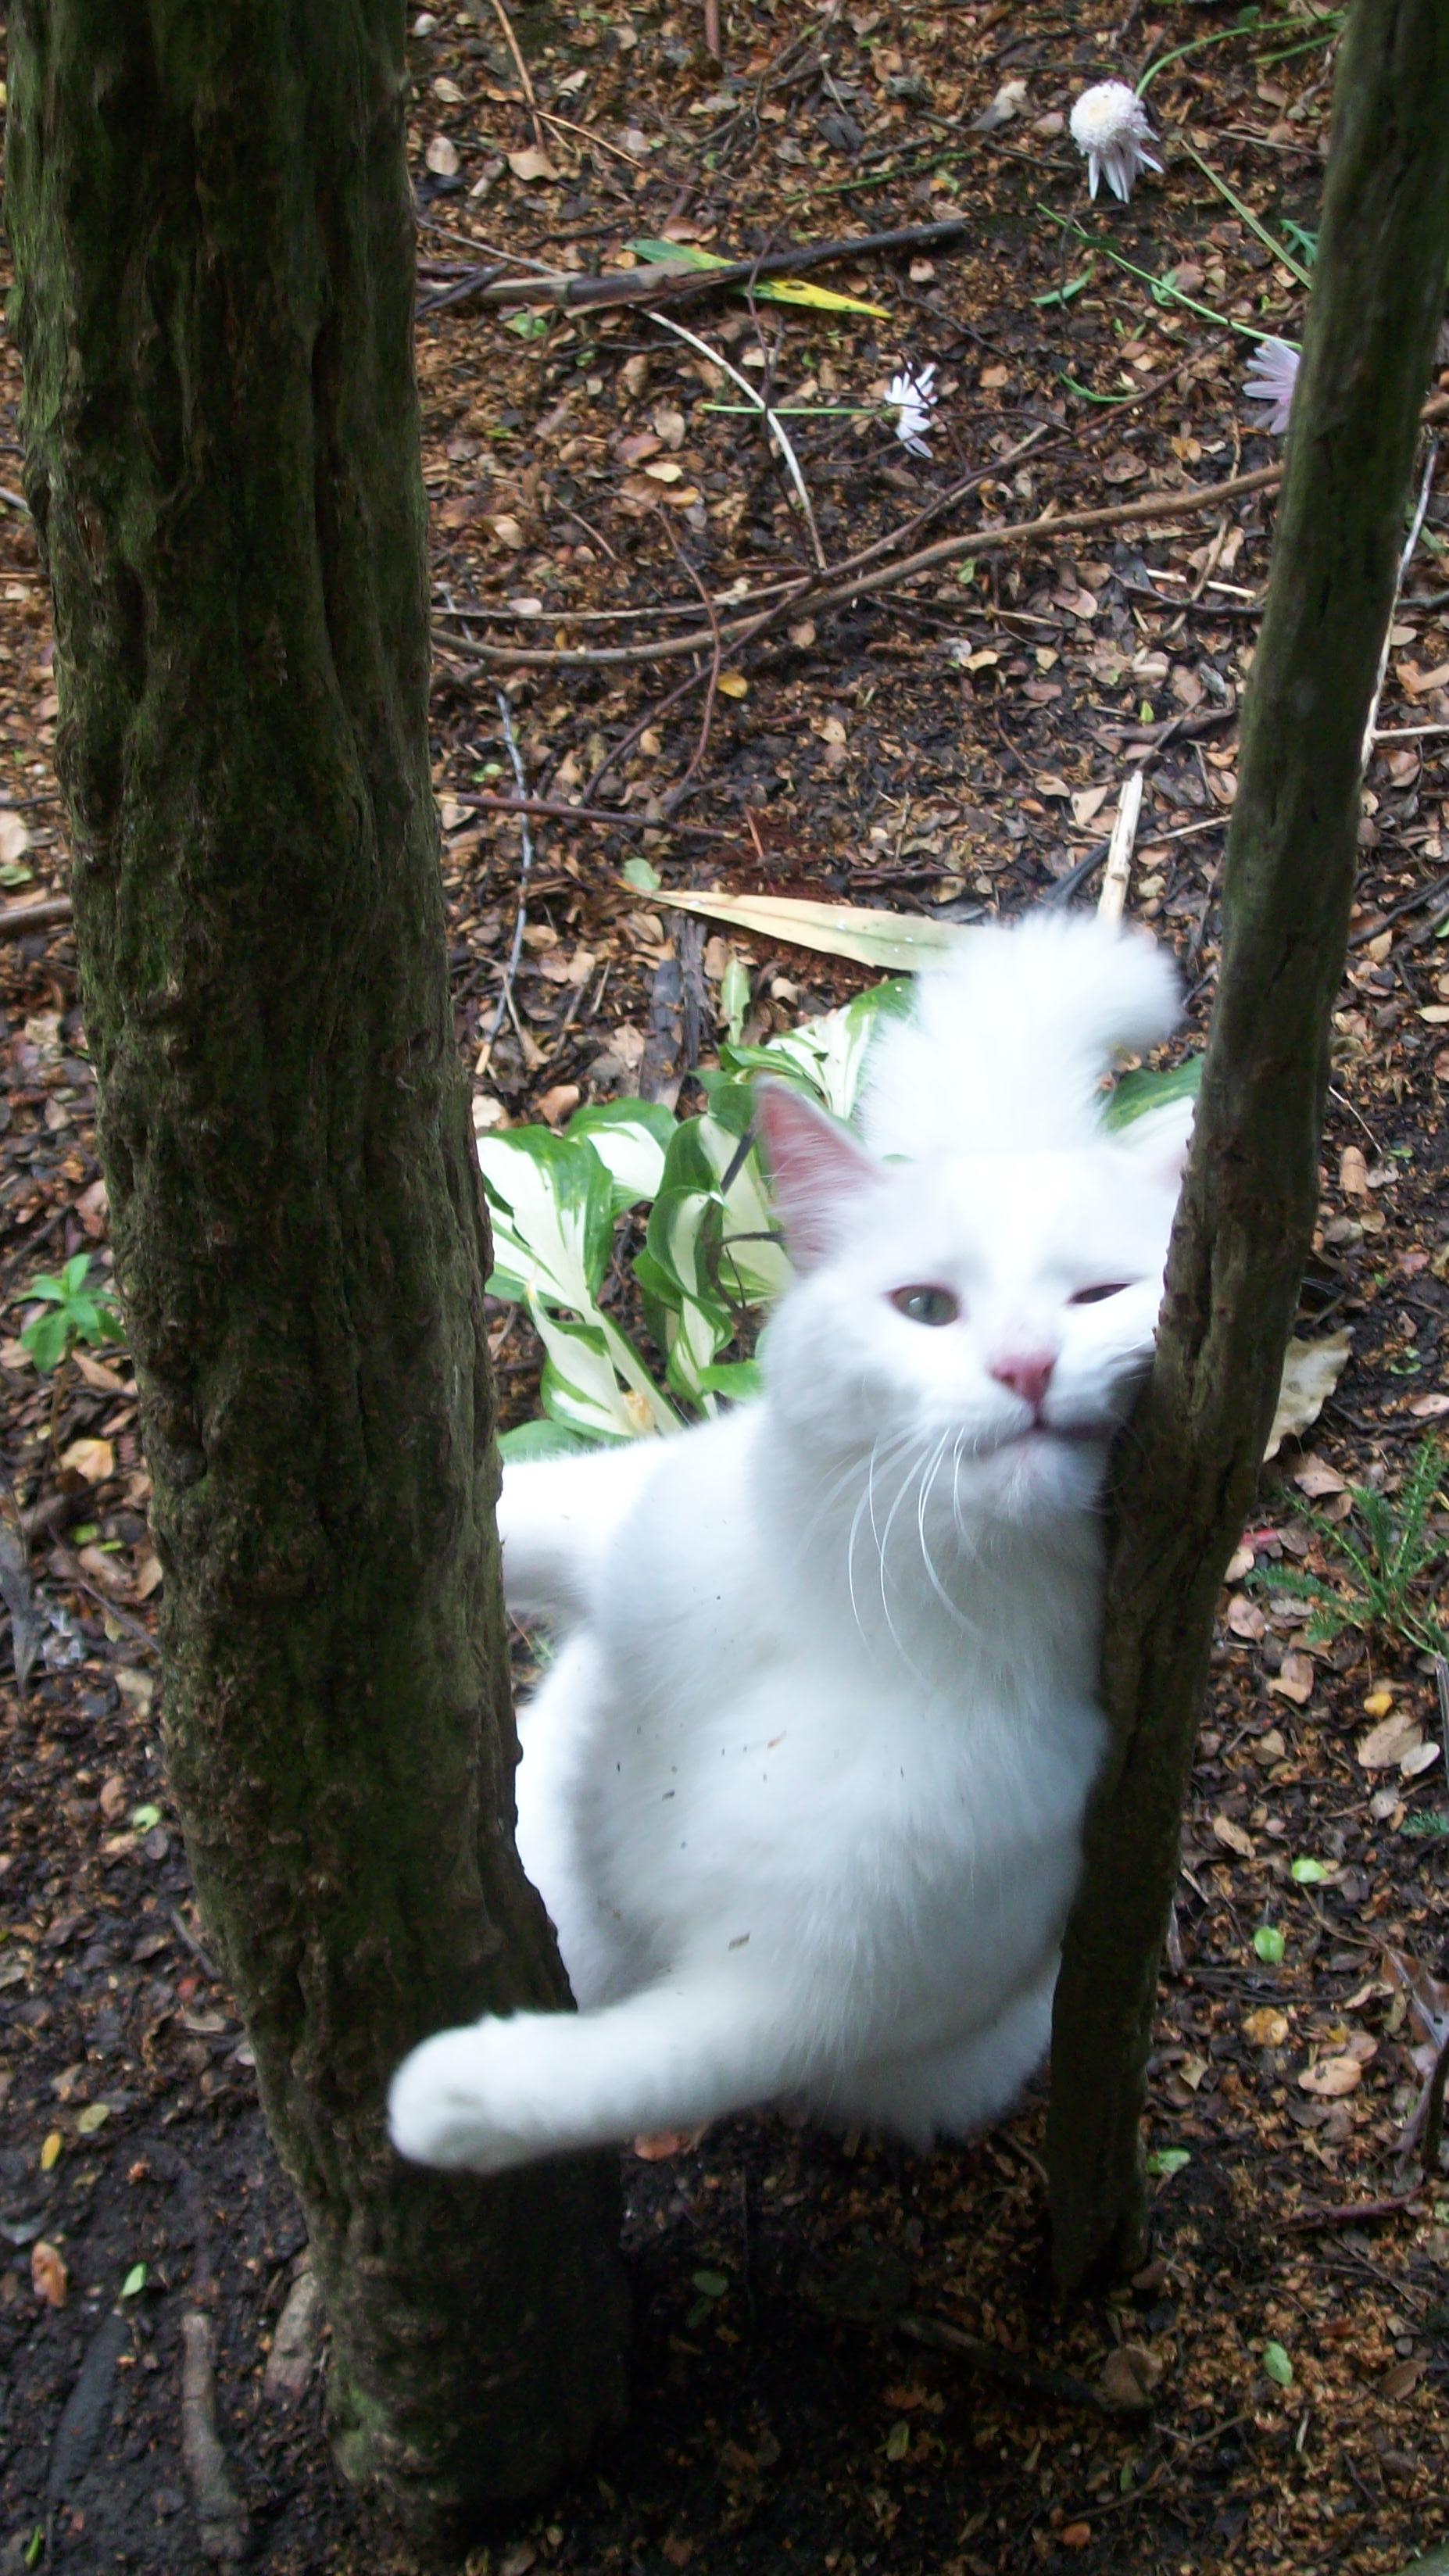 White Cats at Play, Cat, Lancewood, Wait, Spring, HQ Photo